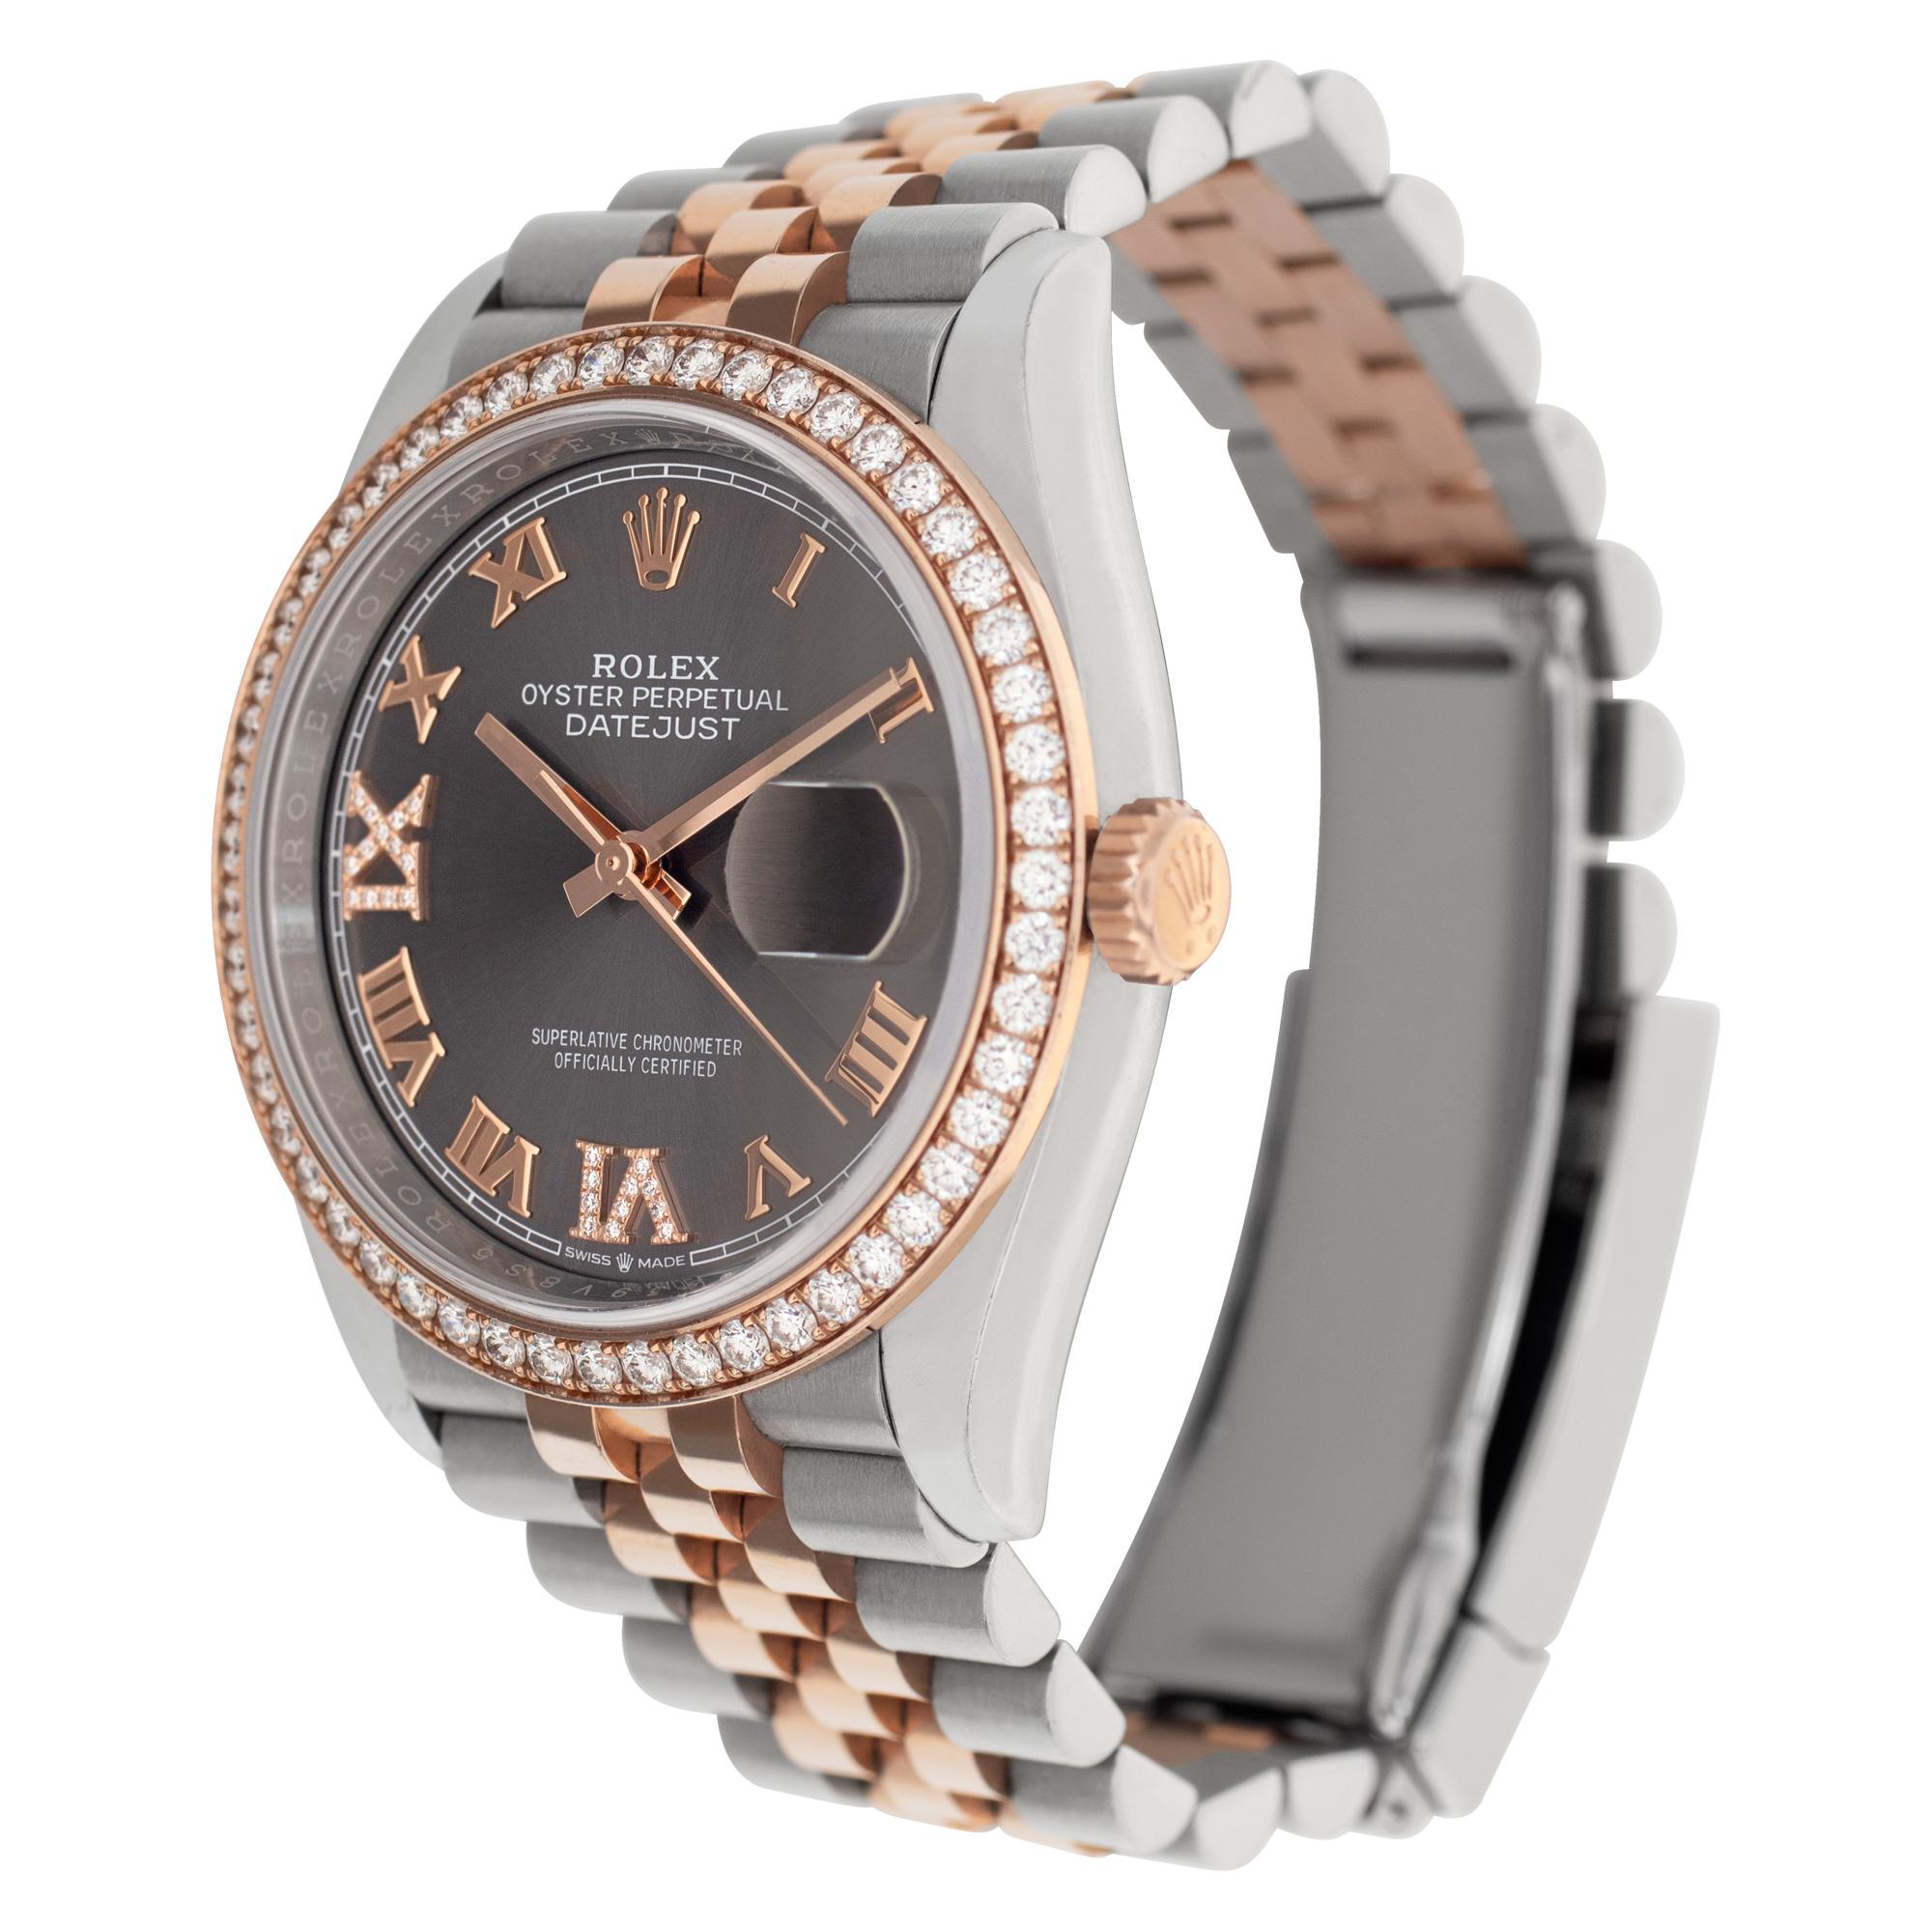 Brilliant Cut Rolex Datejust in Stainless Steel & 18k Rose Gold, Ref. 126281 RBR